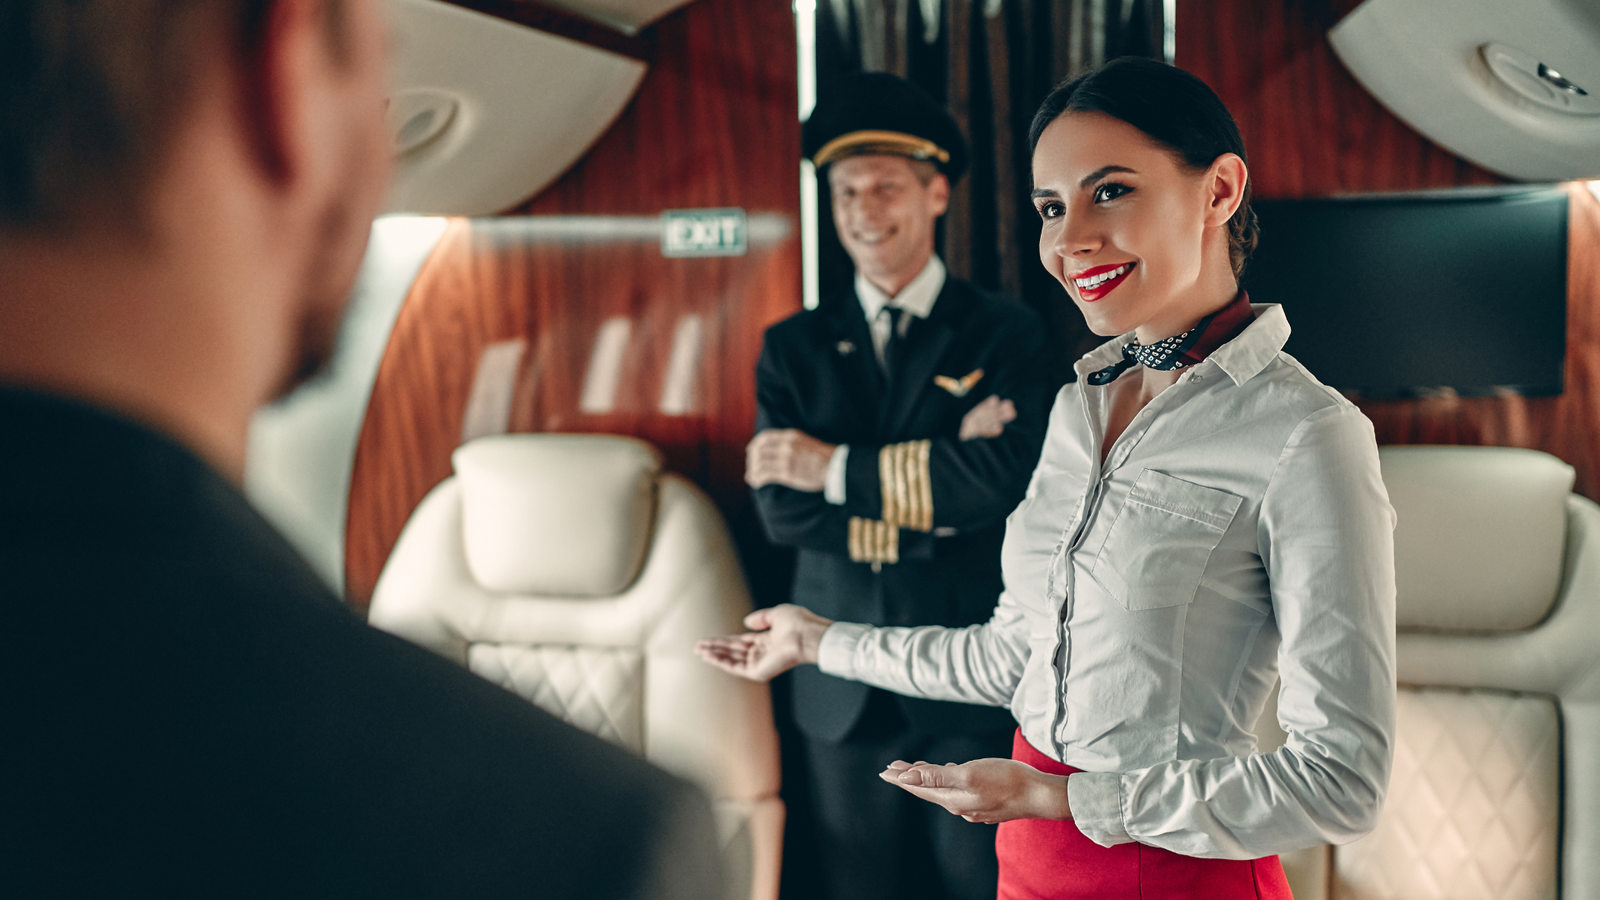 Flight Attendant Uniforms Ditch Gender. How Does That Fly in the Air? - WSJ